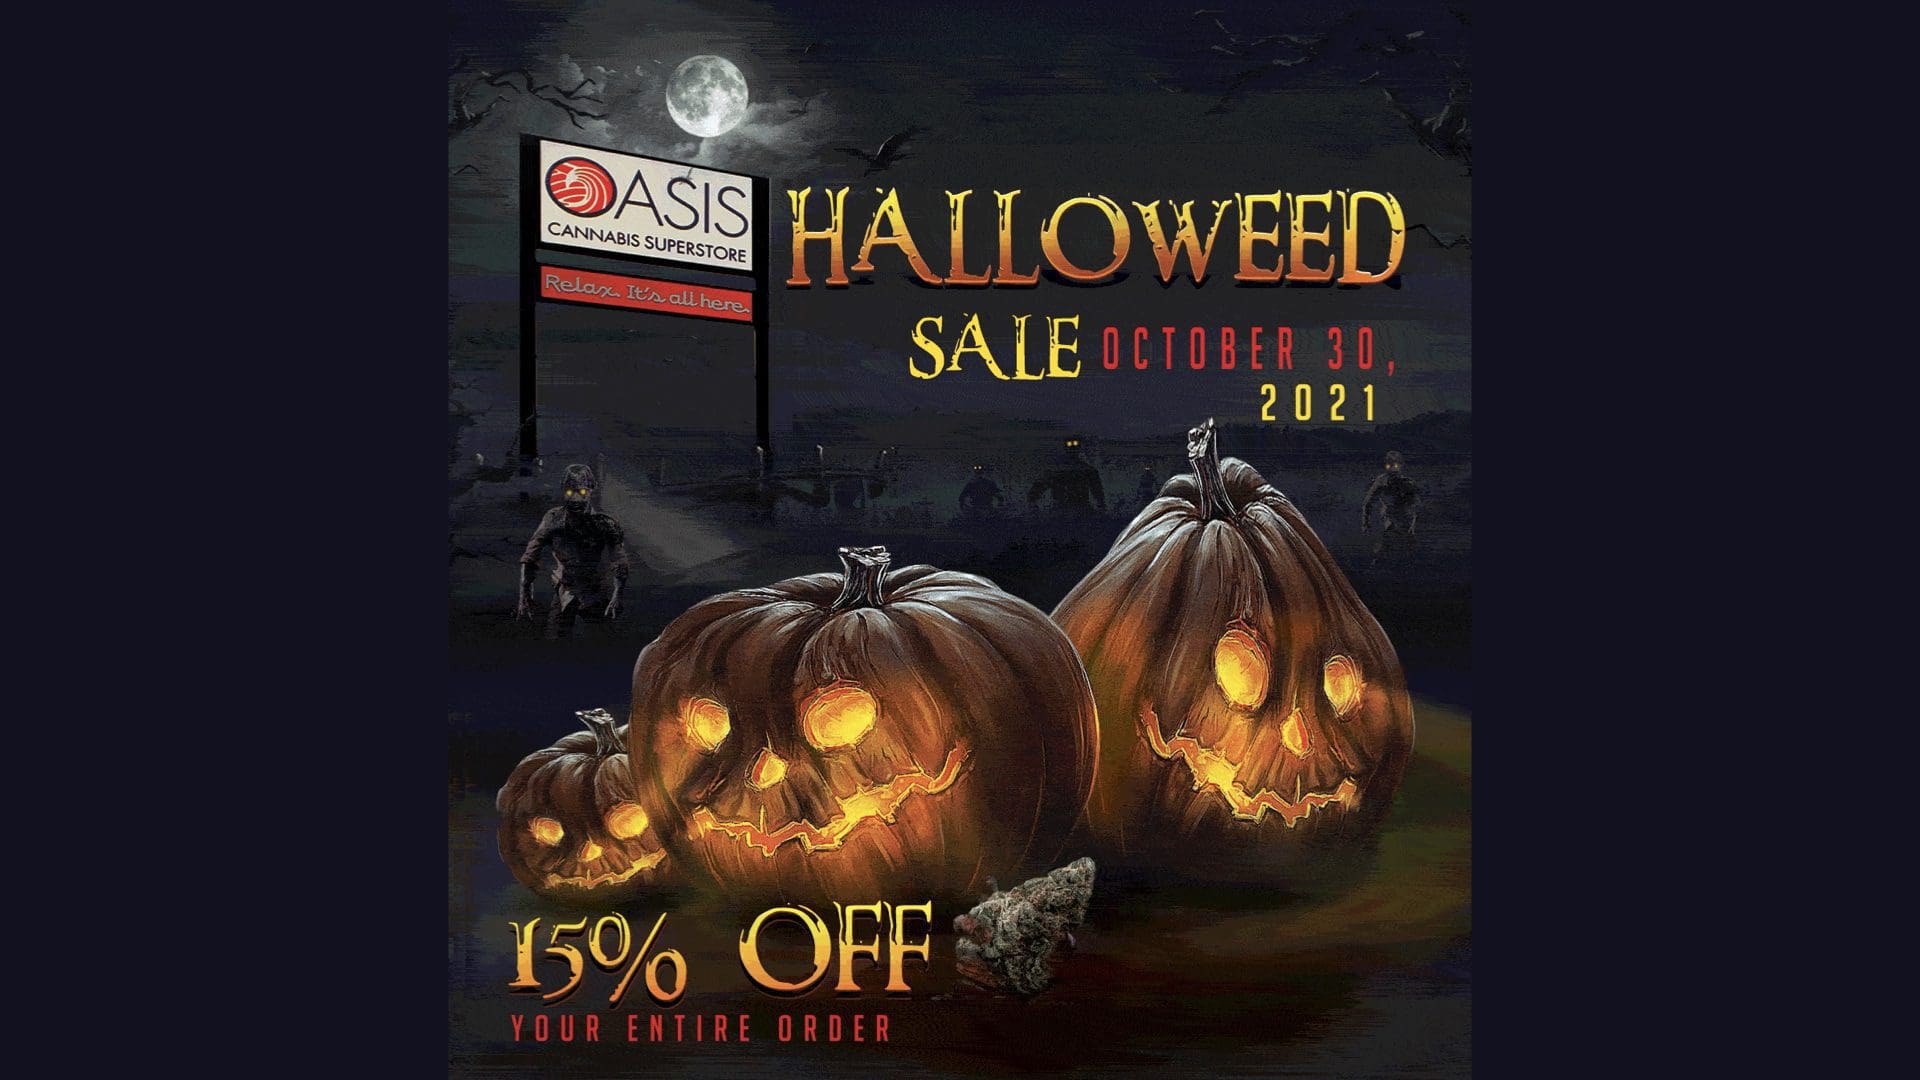 Oasis Halloween Sale Promo with Pumpkins and Oasis Sign